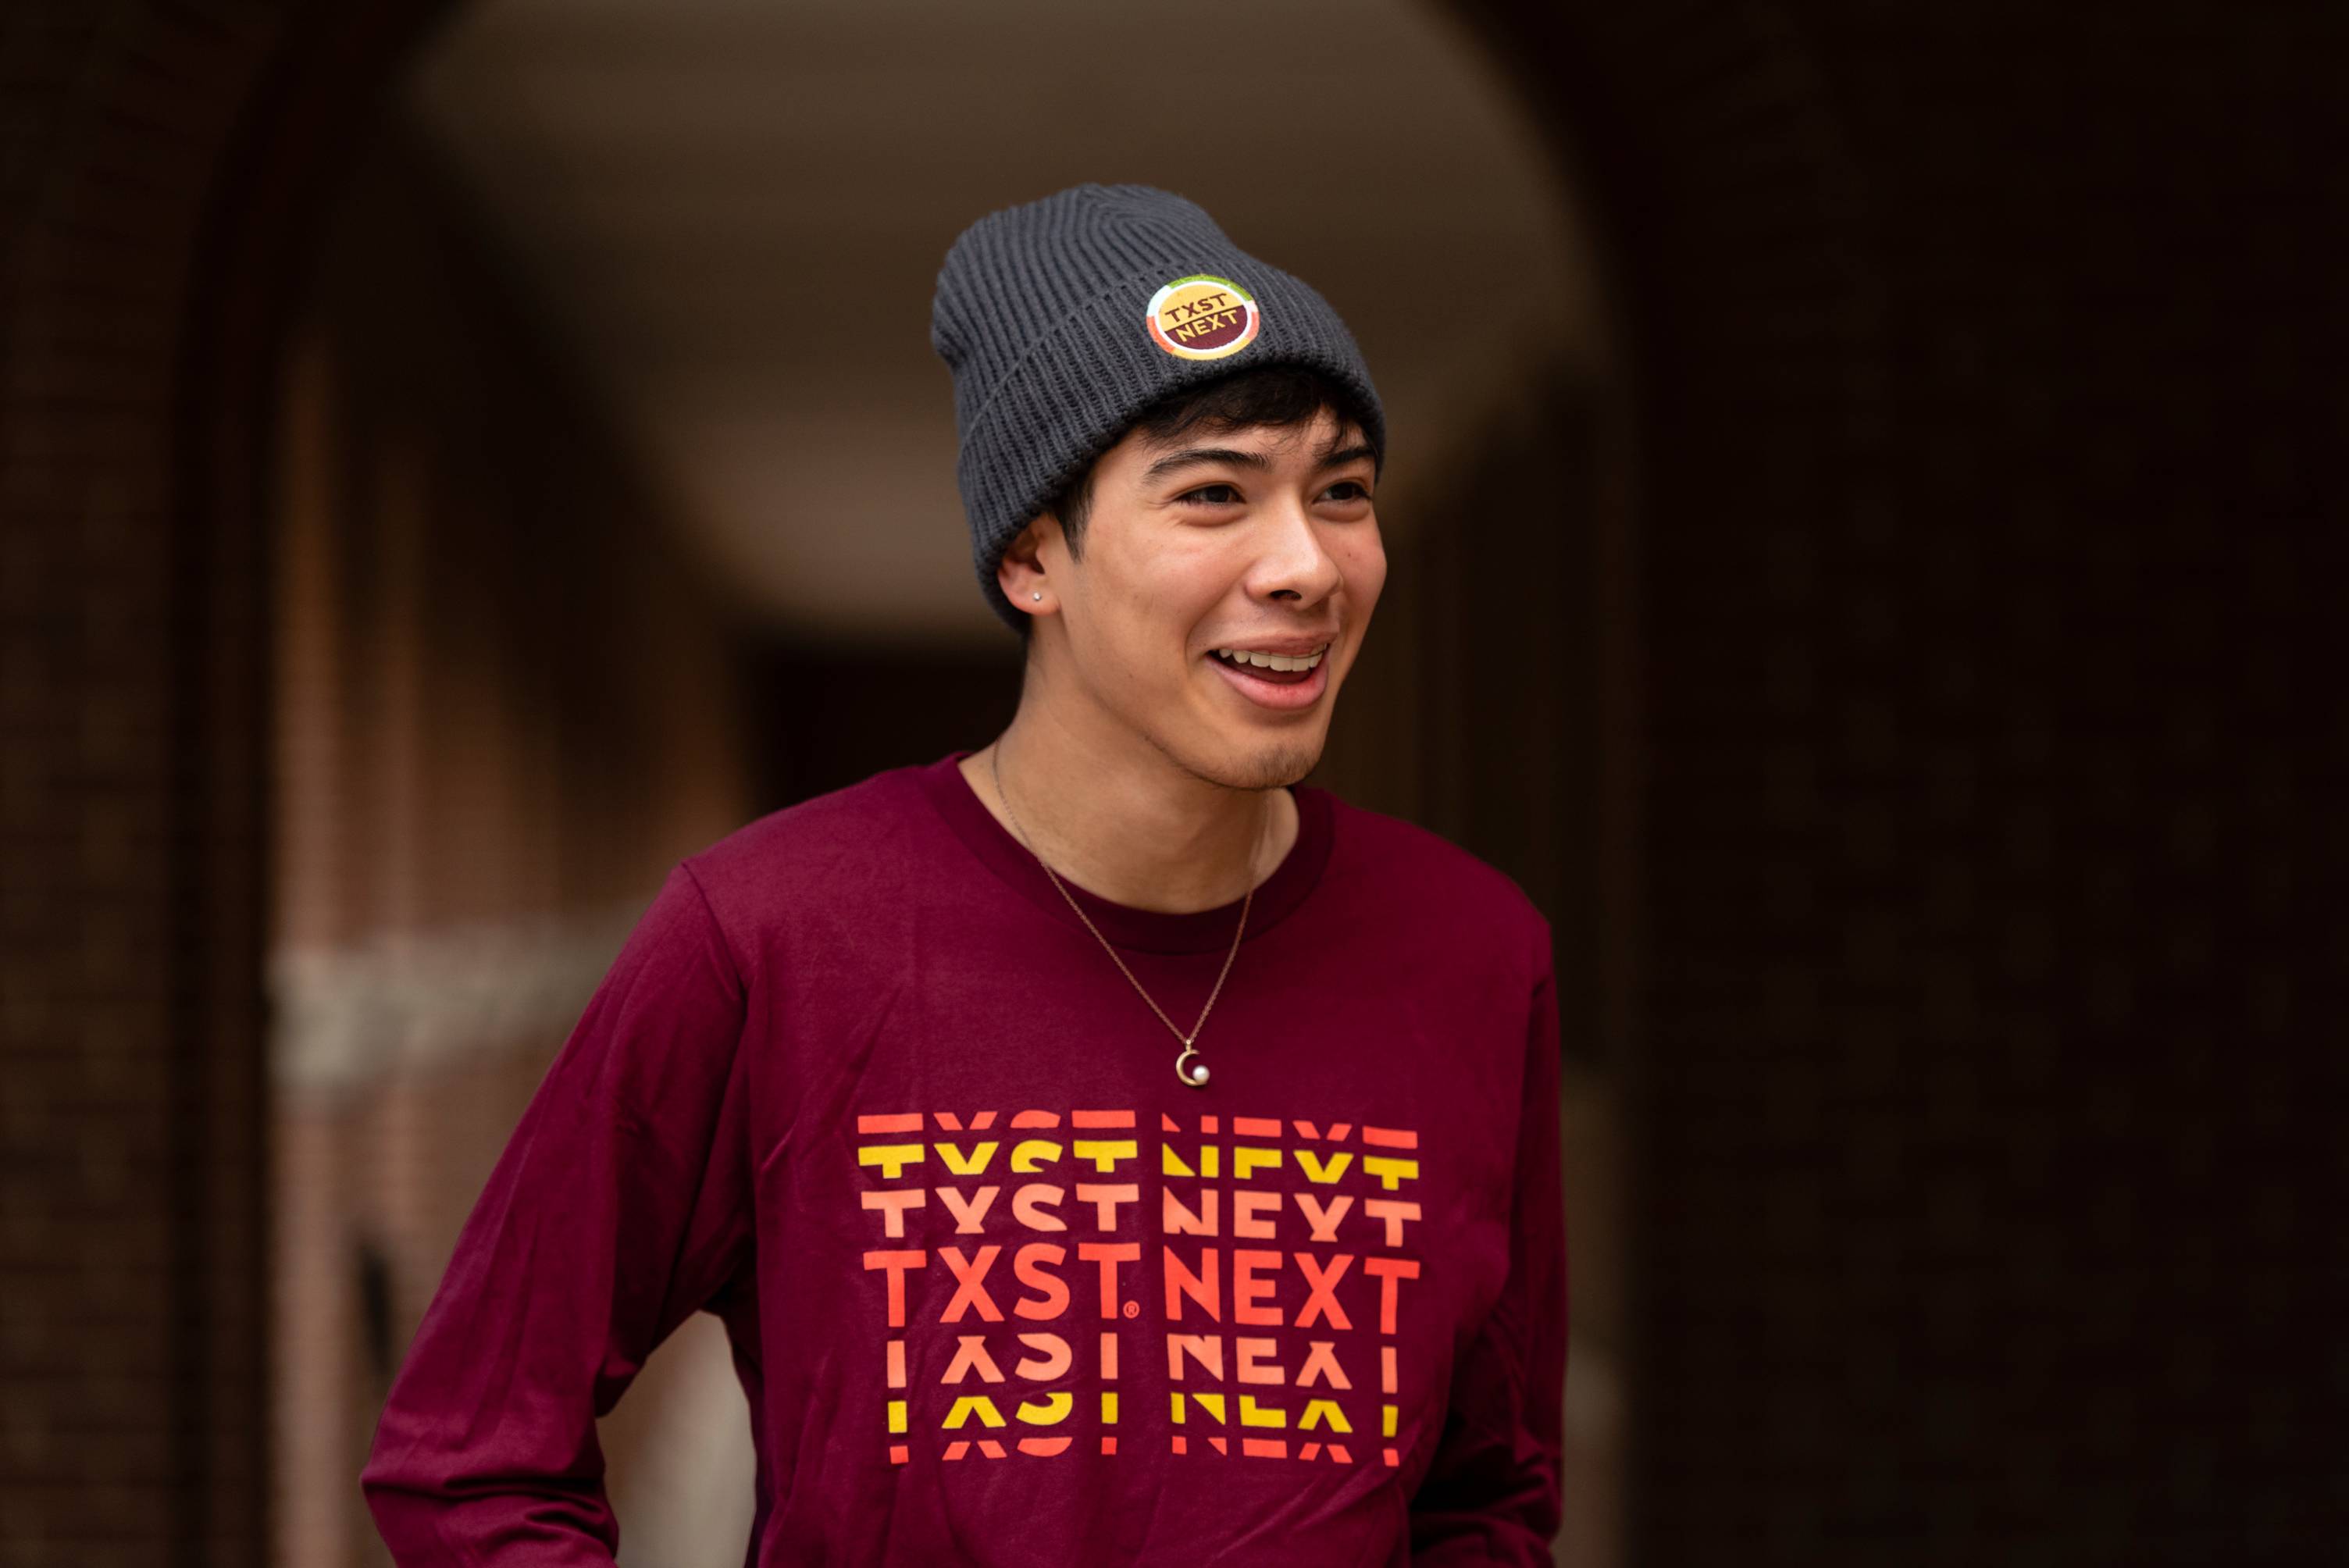 Texas State Student Wearing TXST NEXT merchandise.